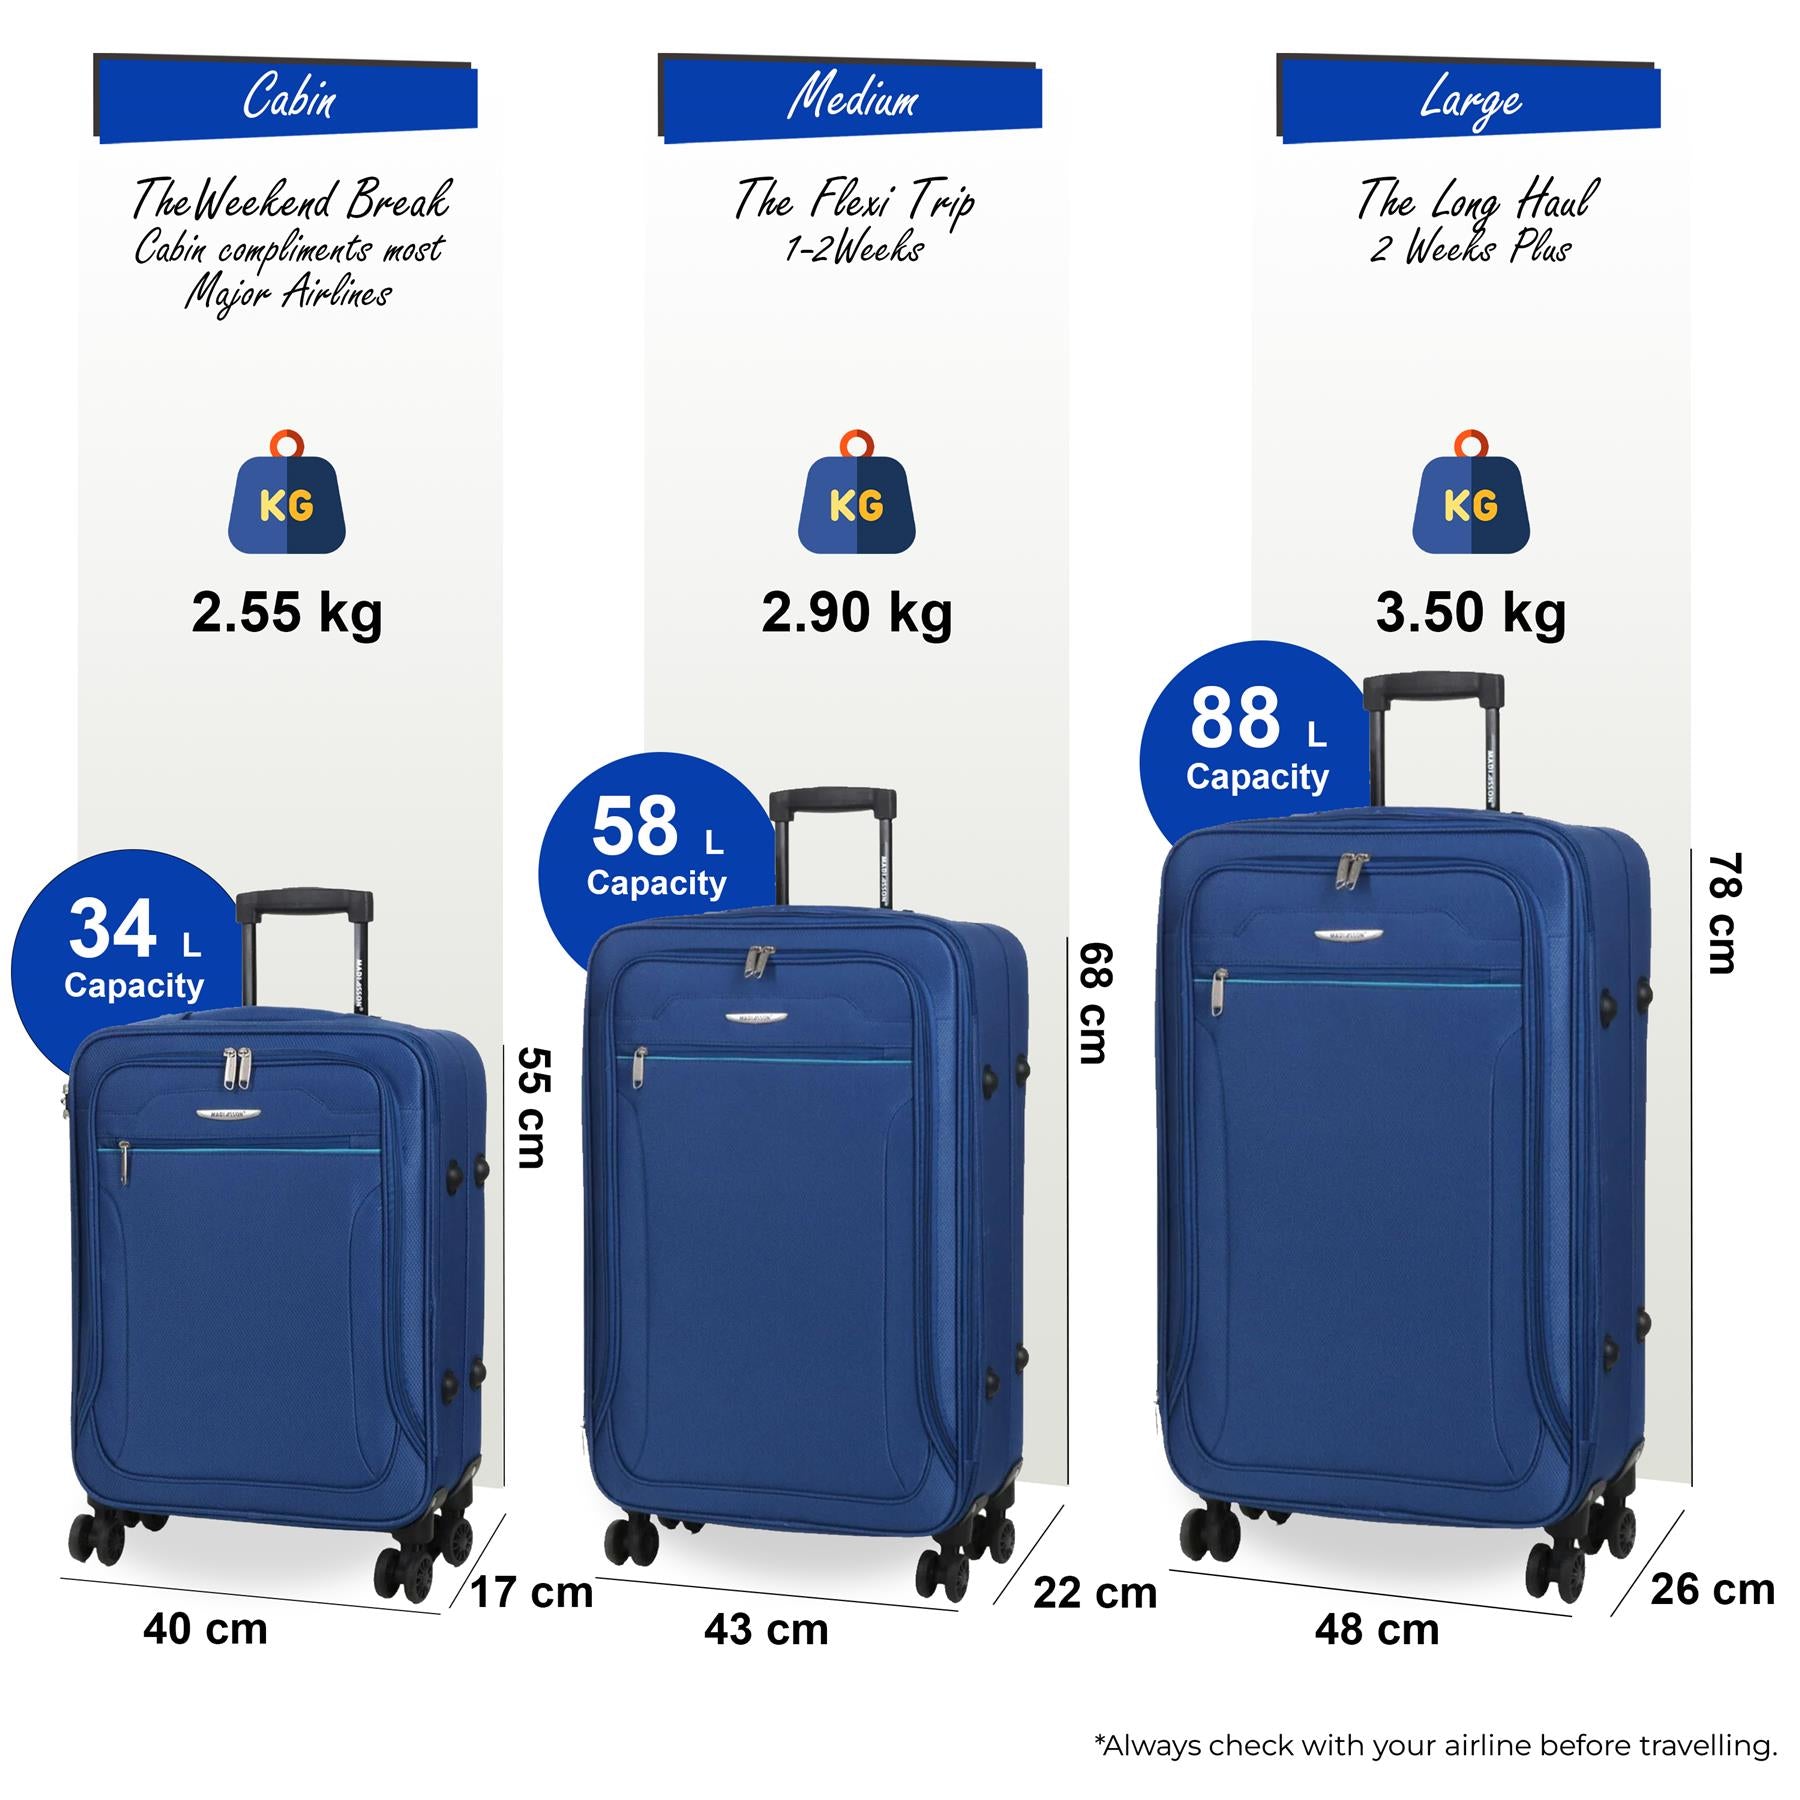 Calera Set of 3 Soft Shell Suitcase in Blue